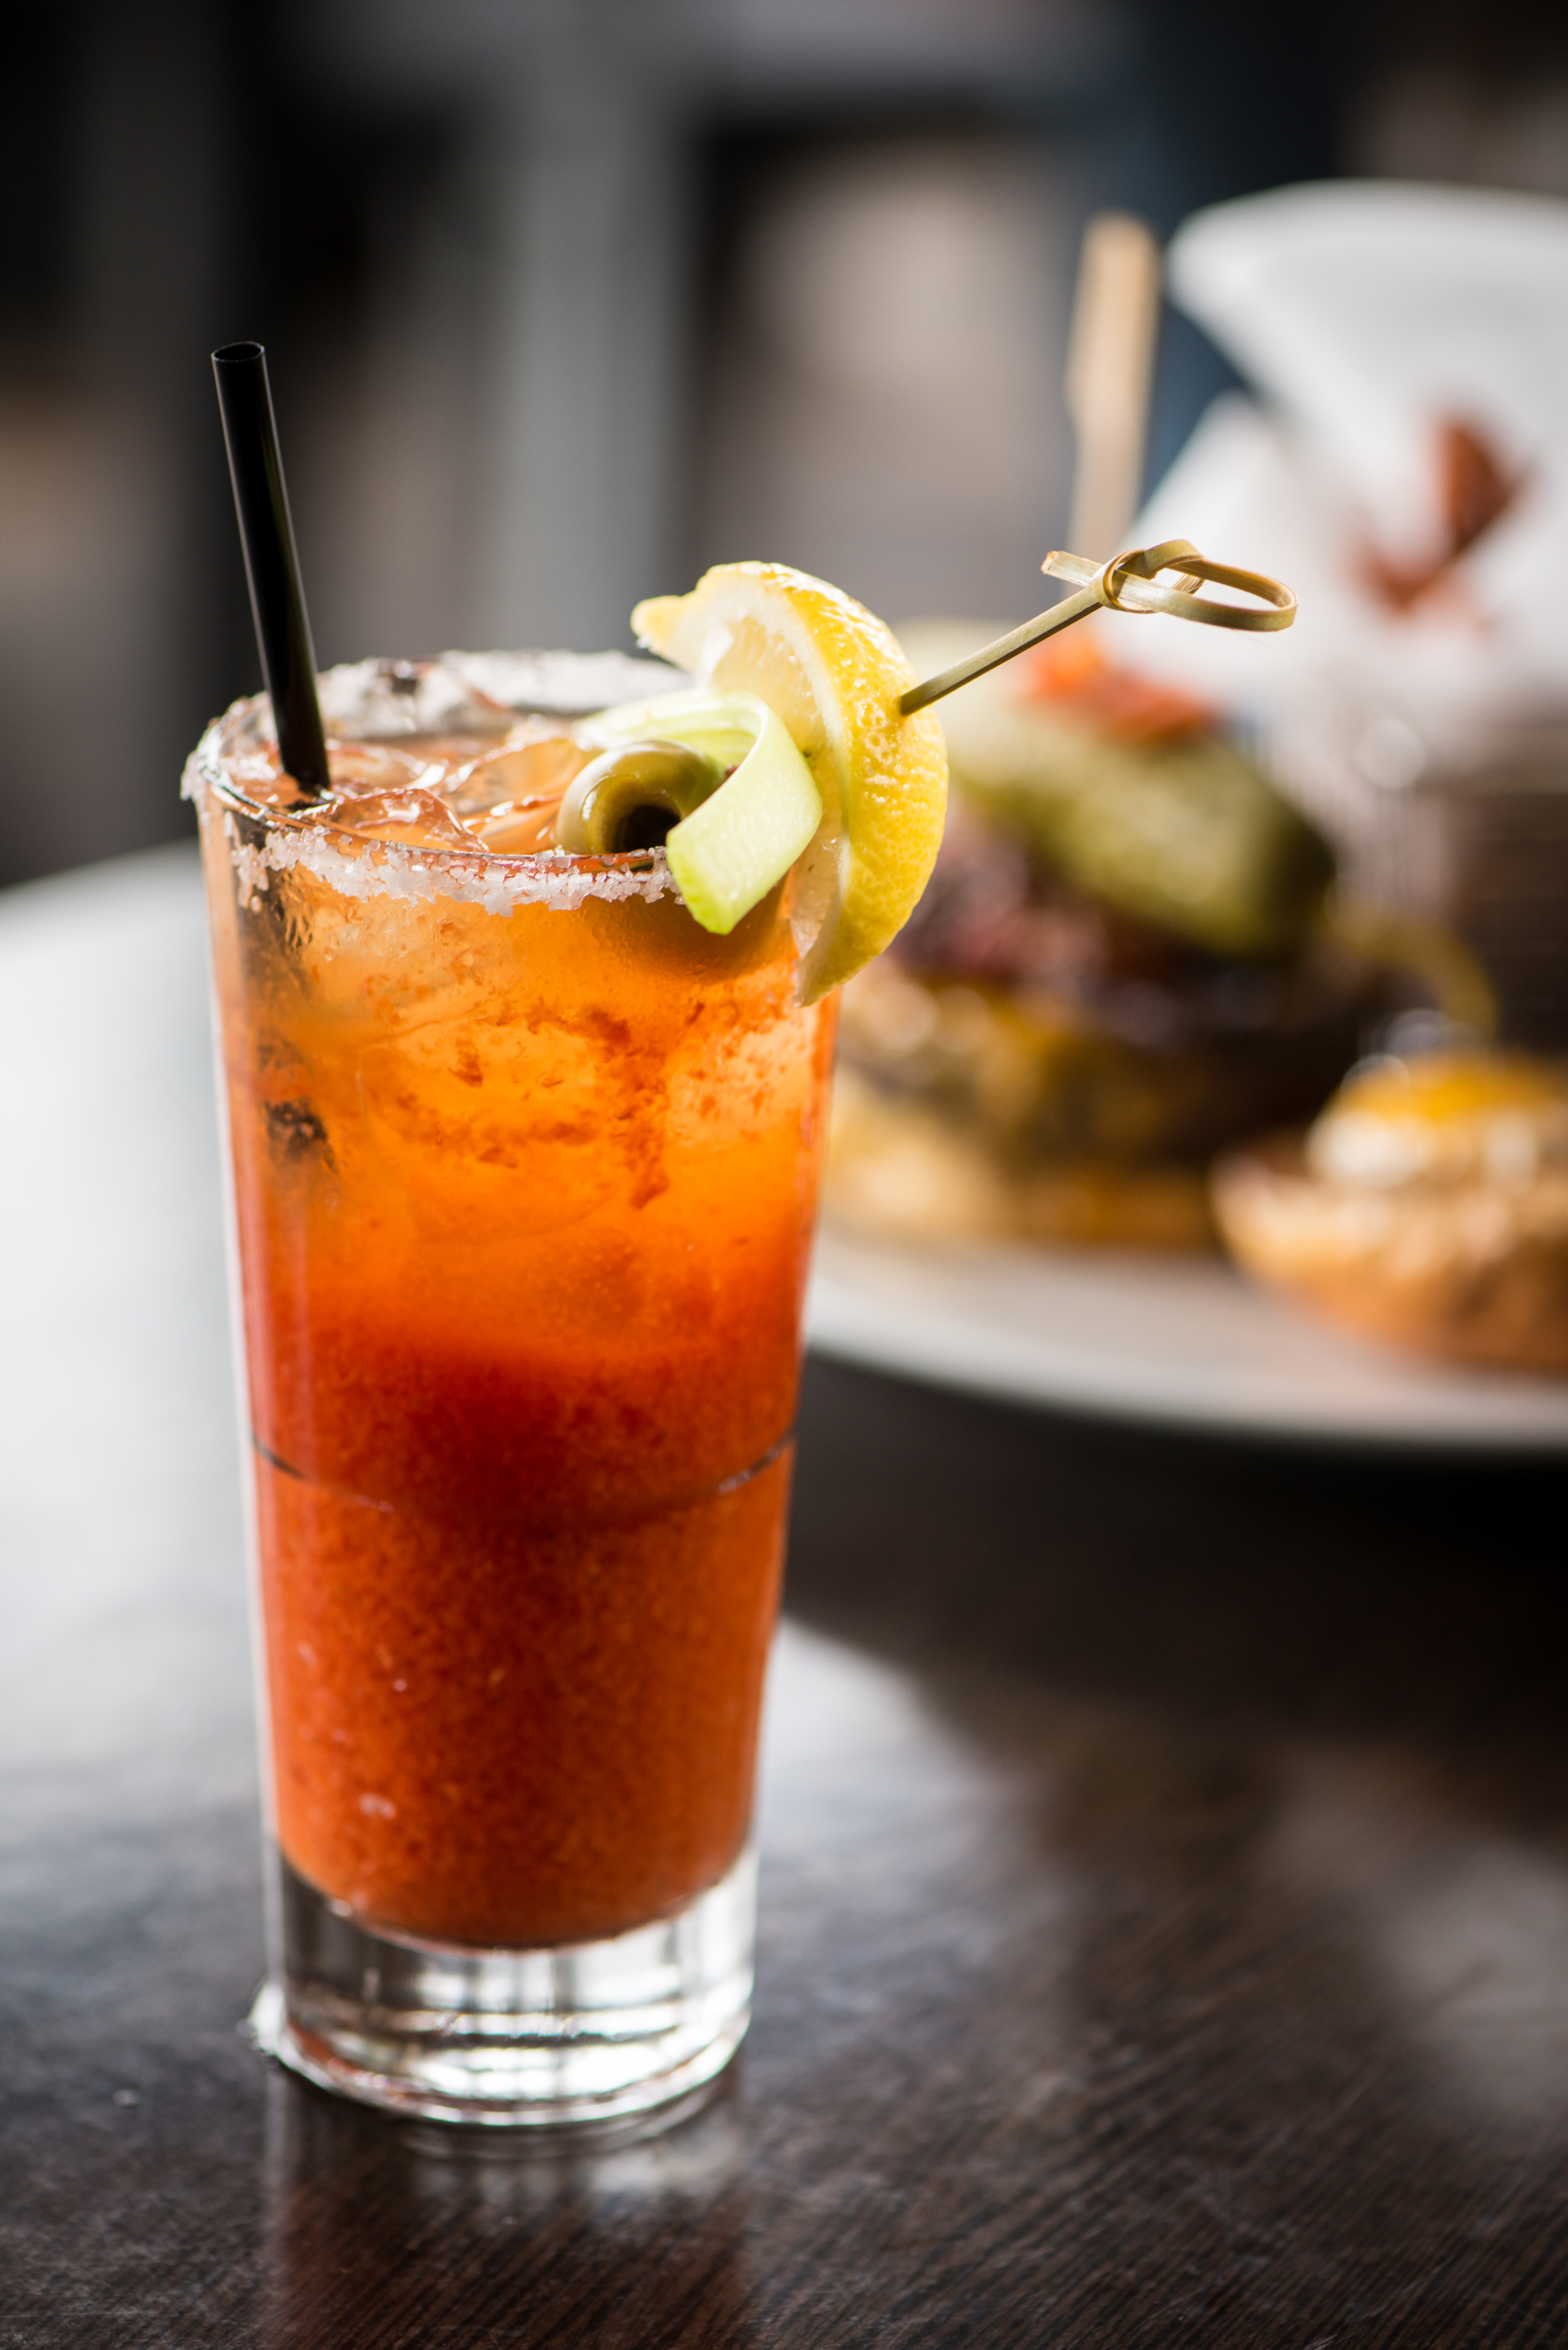 Celebrate National Bloody Mary Day & Cure Your NYE Hangover with Top Bloody Mary Recipes